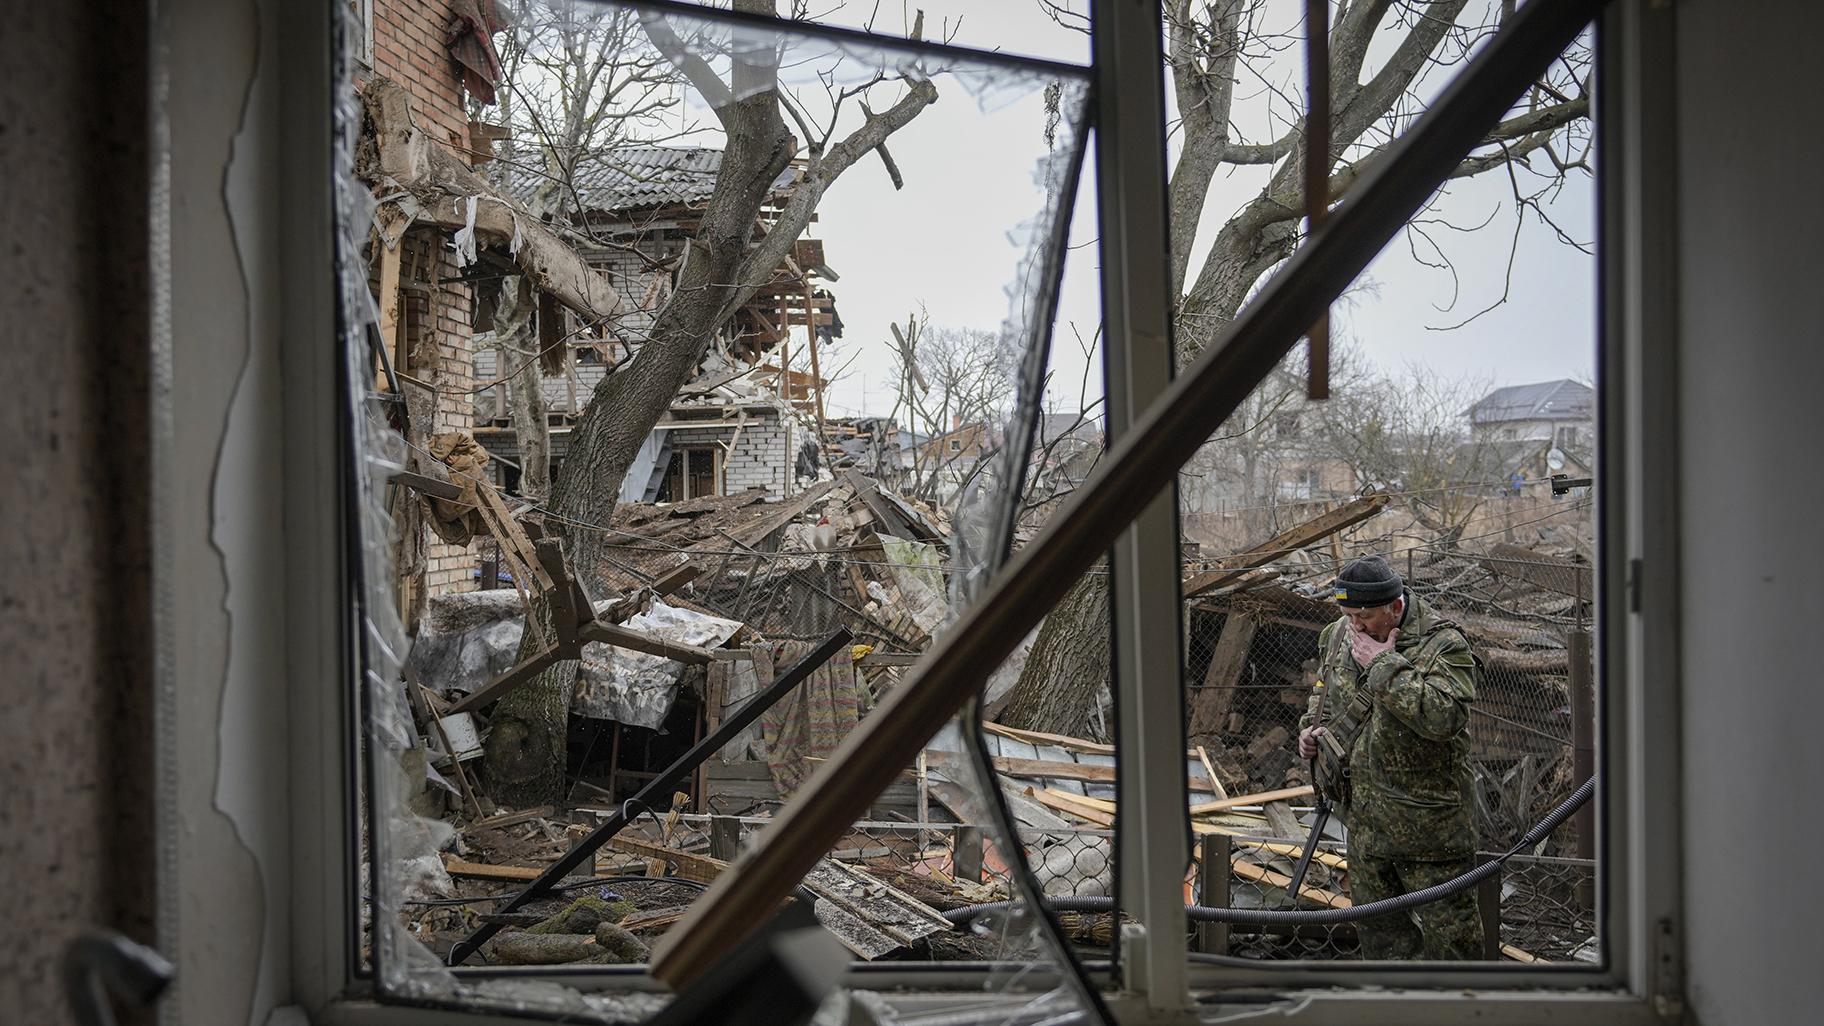 Andrey Goncharuk, 68, a member of territorial defense wipes his face in the backyard of a house that was damaged by a Russian airstrike, according to locals, in Gorenka, outside the capital Kyiv, Ukraine, Wednesday, March 2, 2022. (AP Photo / Vadim Ghirda)